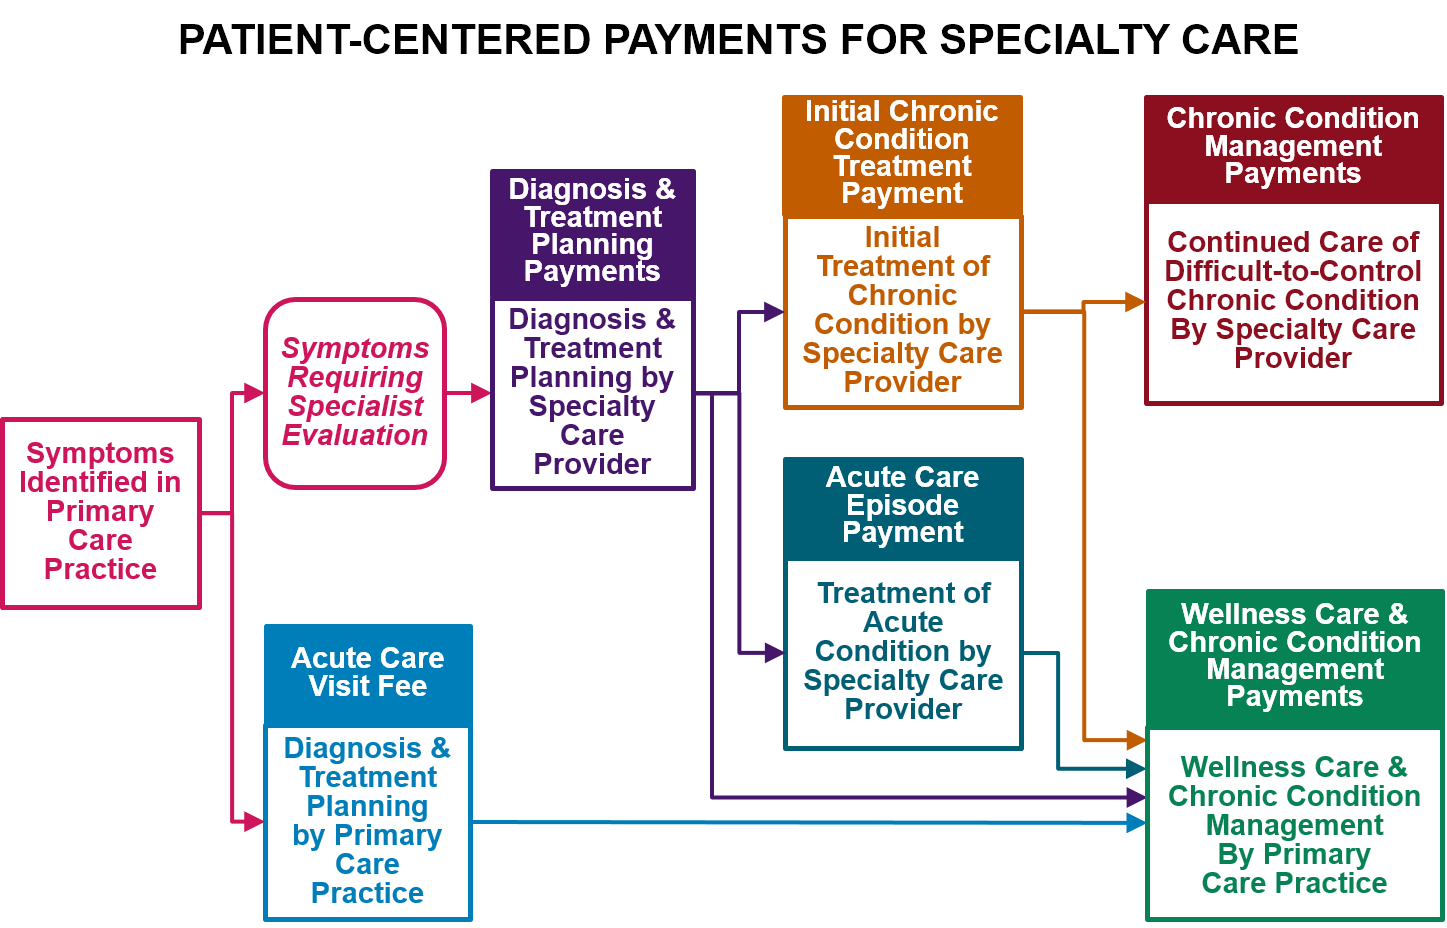 Payments for Care Delivered by Specialty Providers